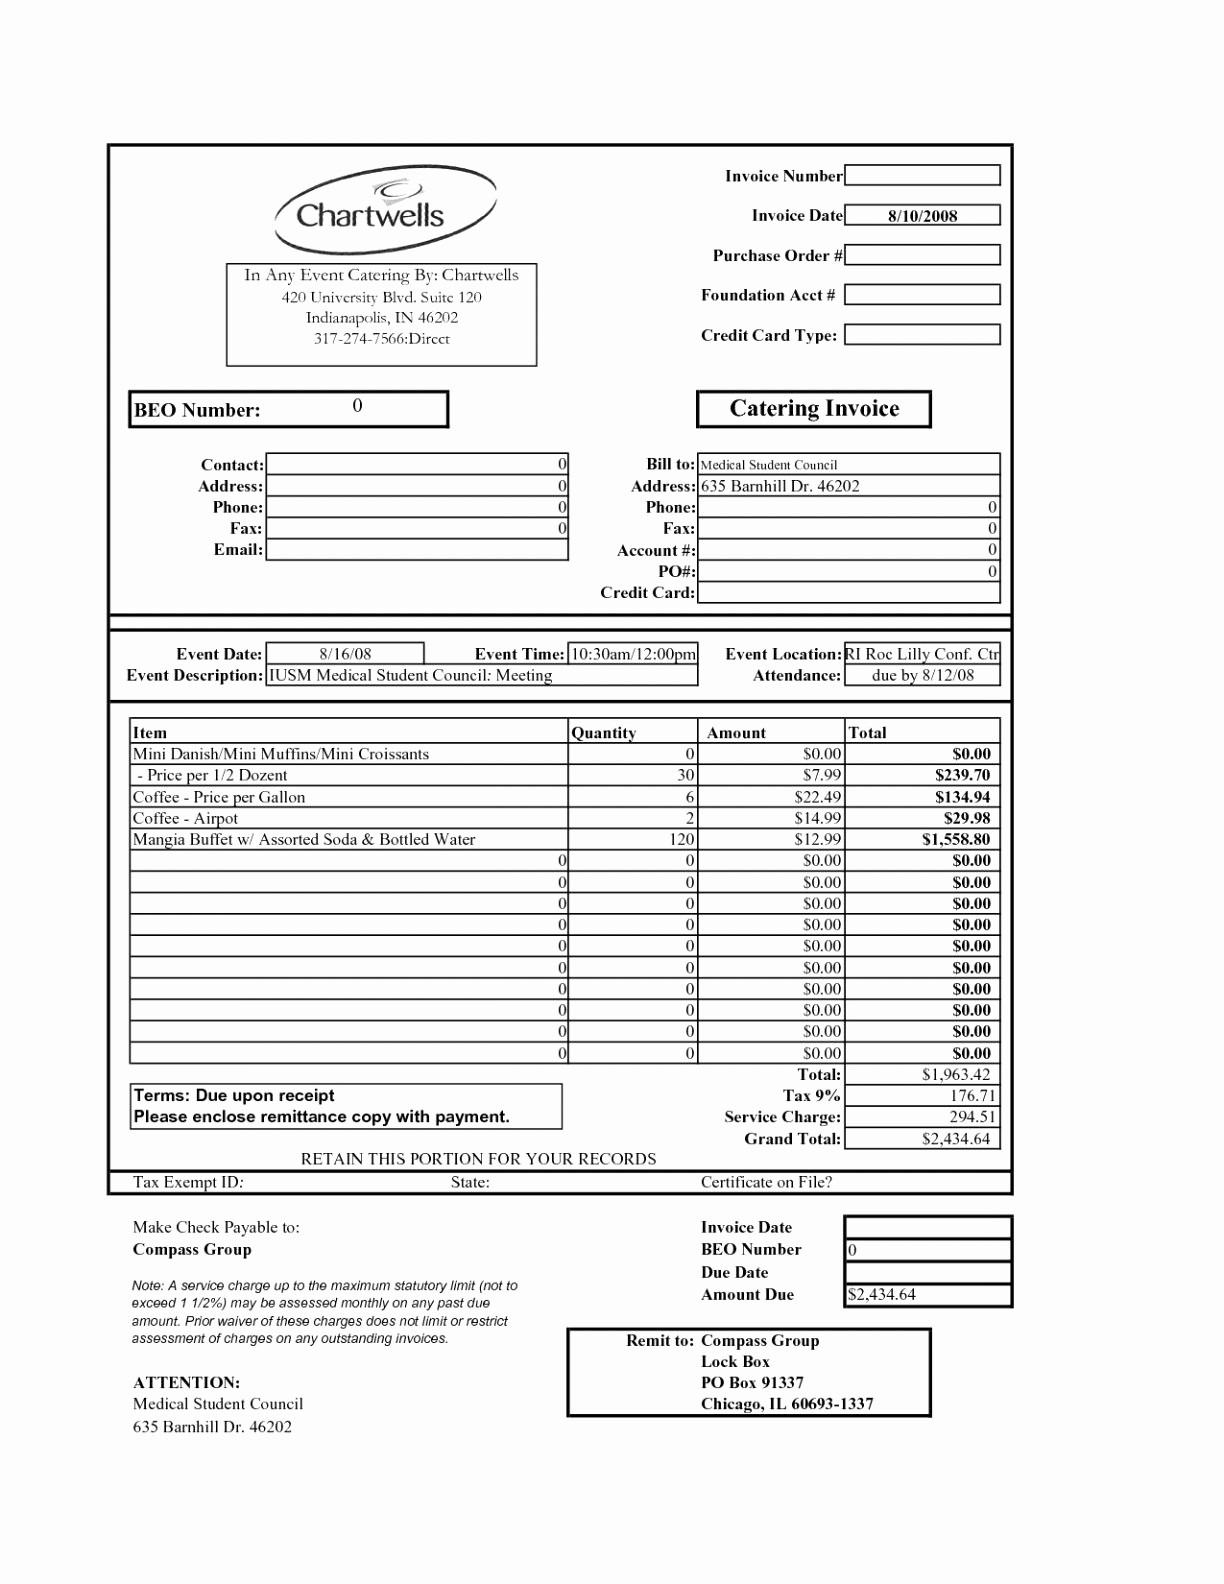 Legal Services Invoice Template Excel Luxury Free Professionales Invoice Template Excel Pdf Word Doc